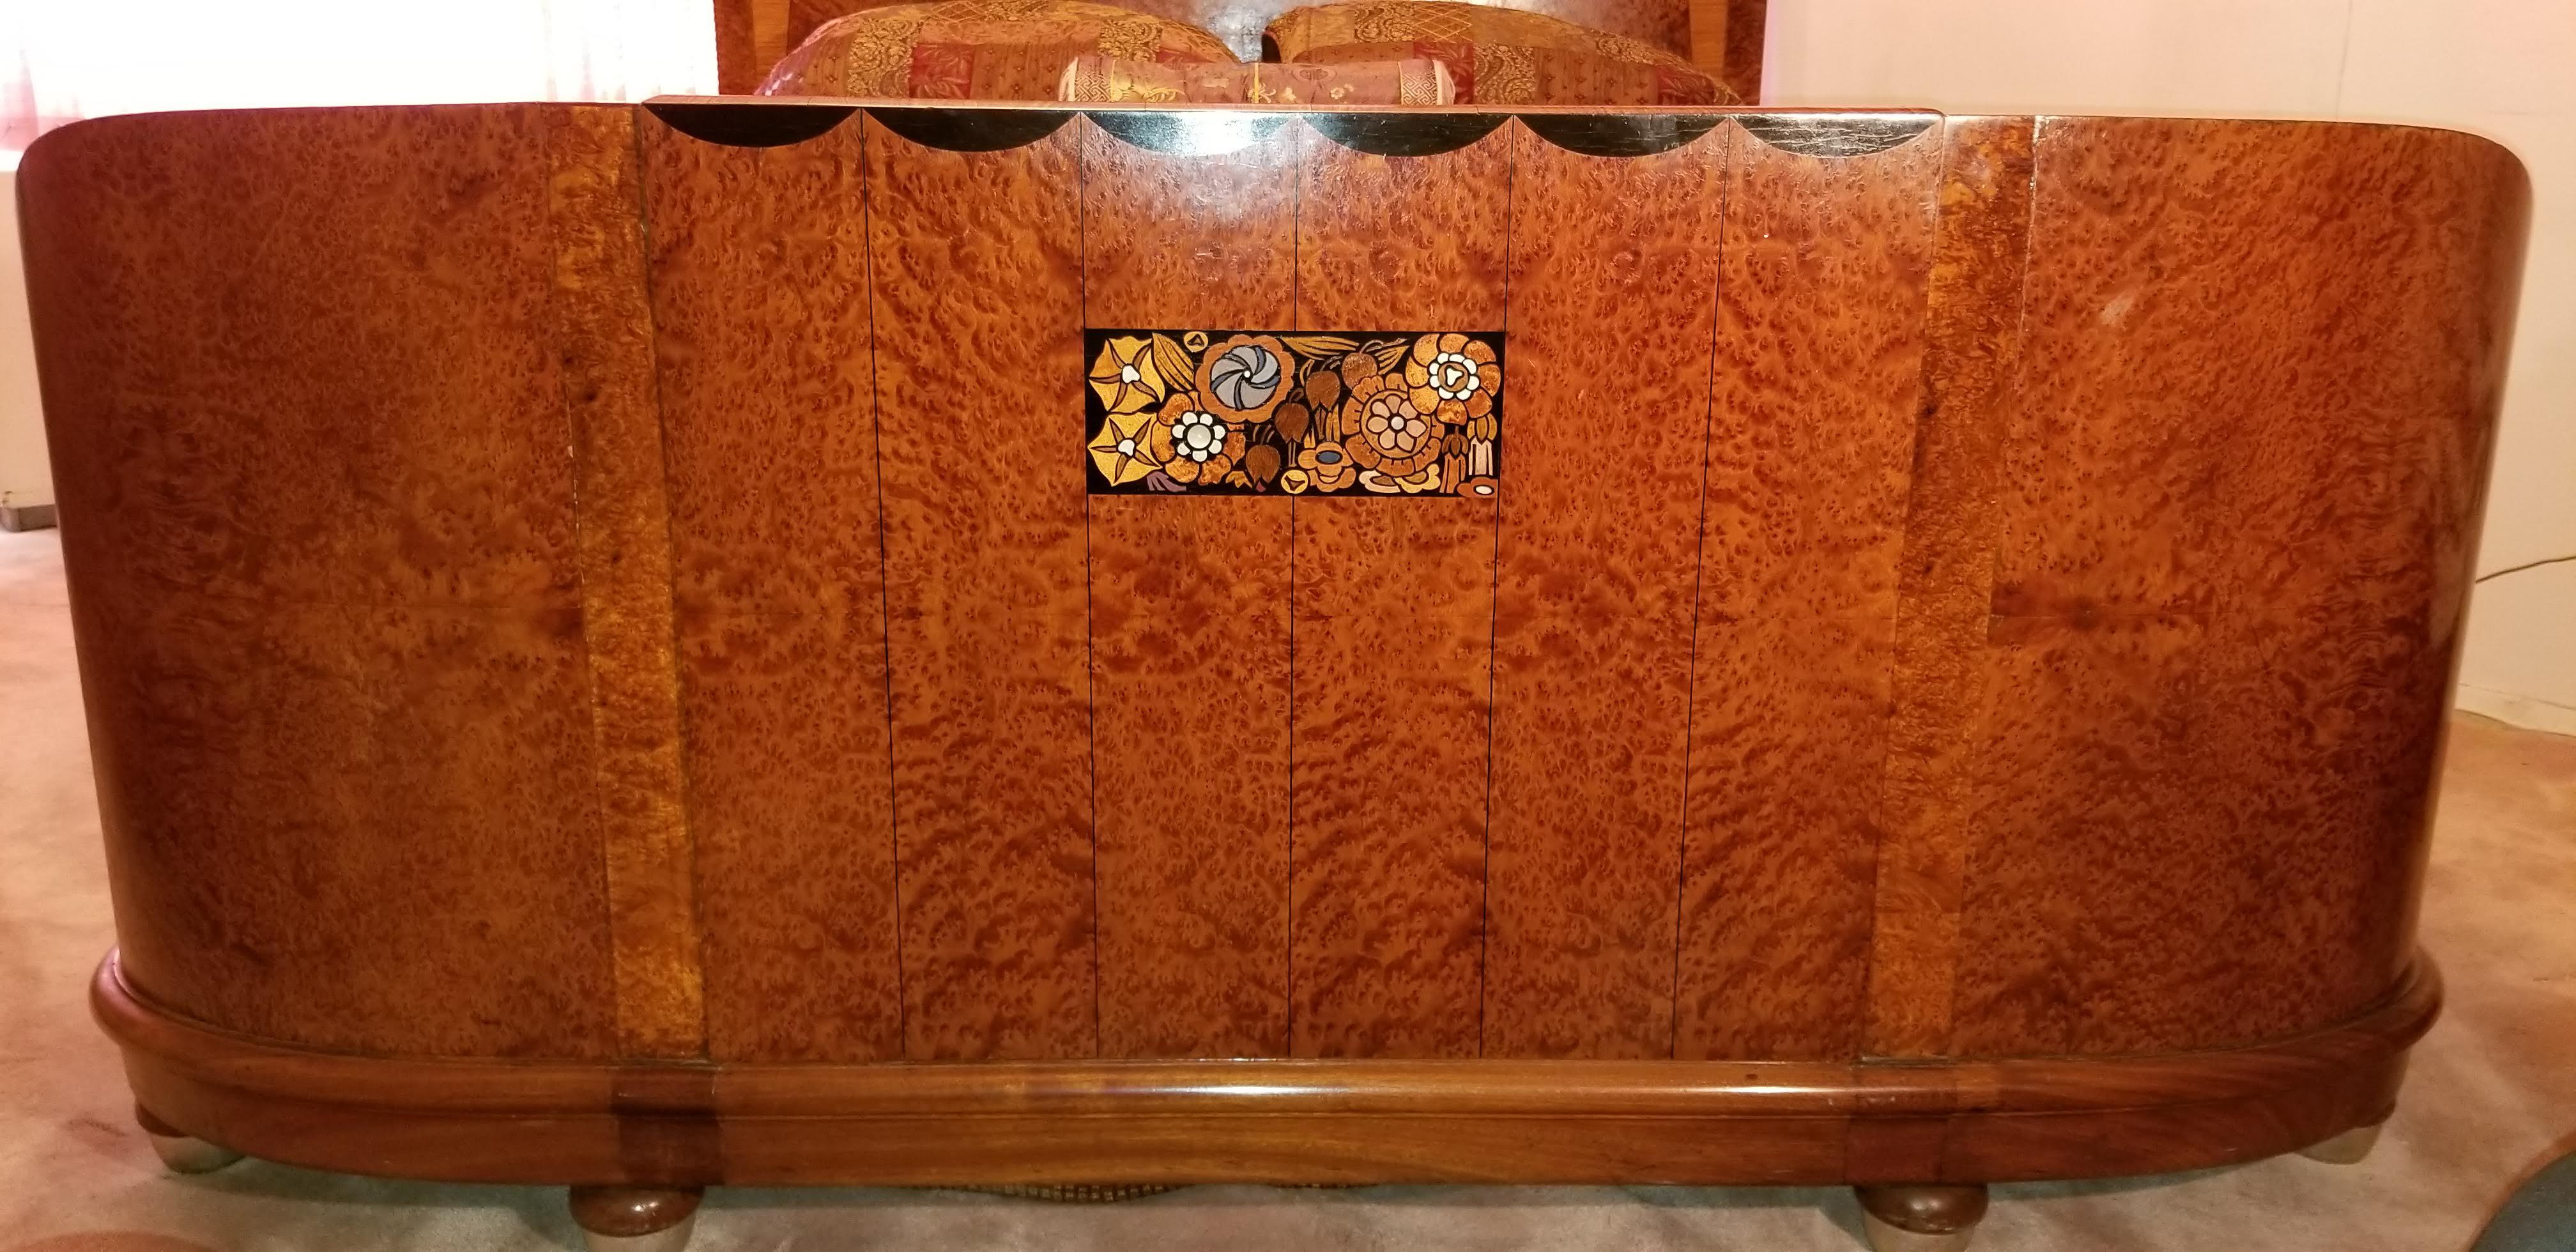 Spectacular French Art Deco Queen size bed comprising headboard, footboard and original matching side rails, in beautifully figured thuya burl wood. Attributed to Maurice Dufrène
The headboard is two-tone and inlaid with mother of pearl